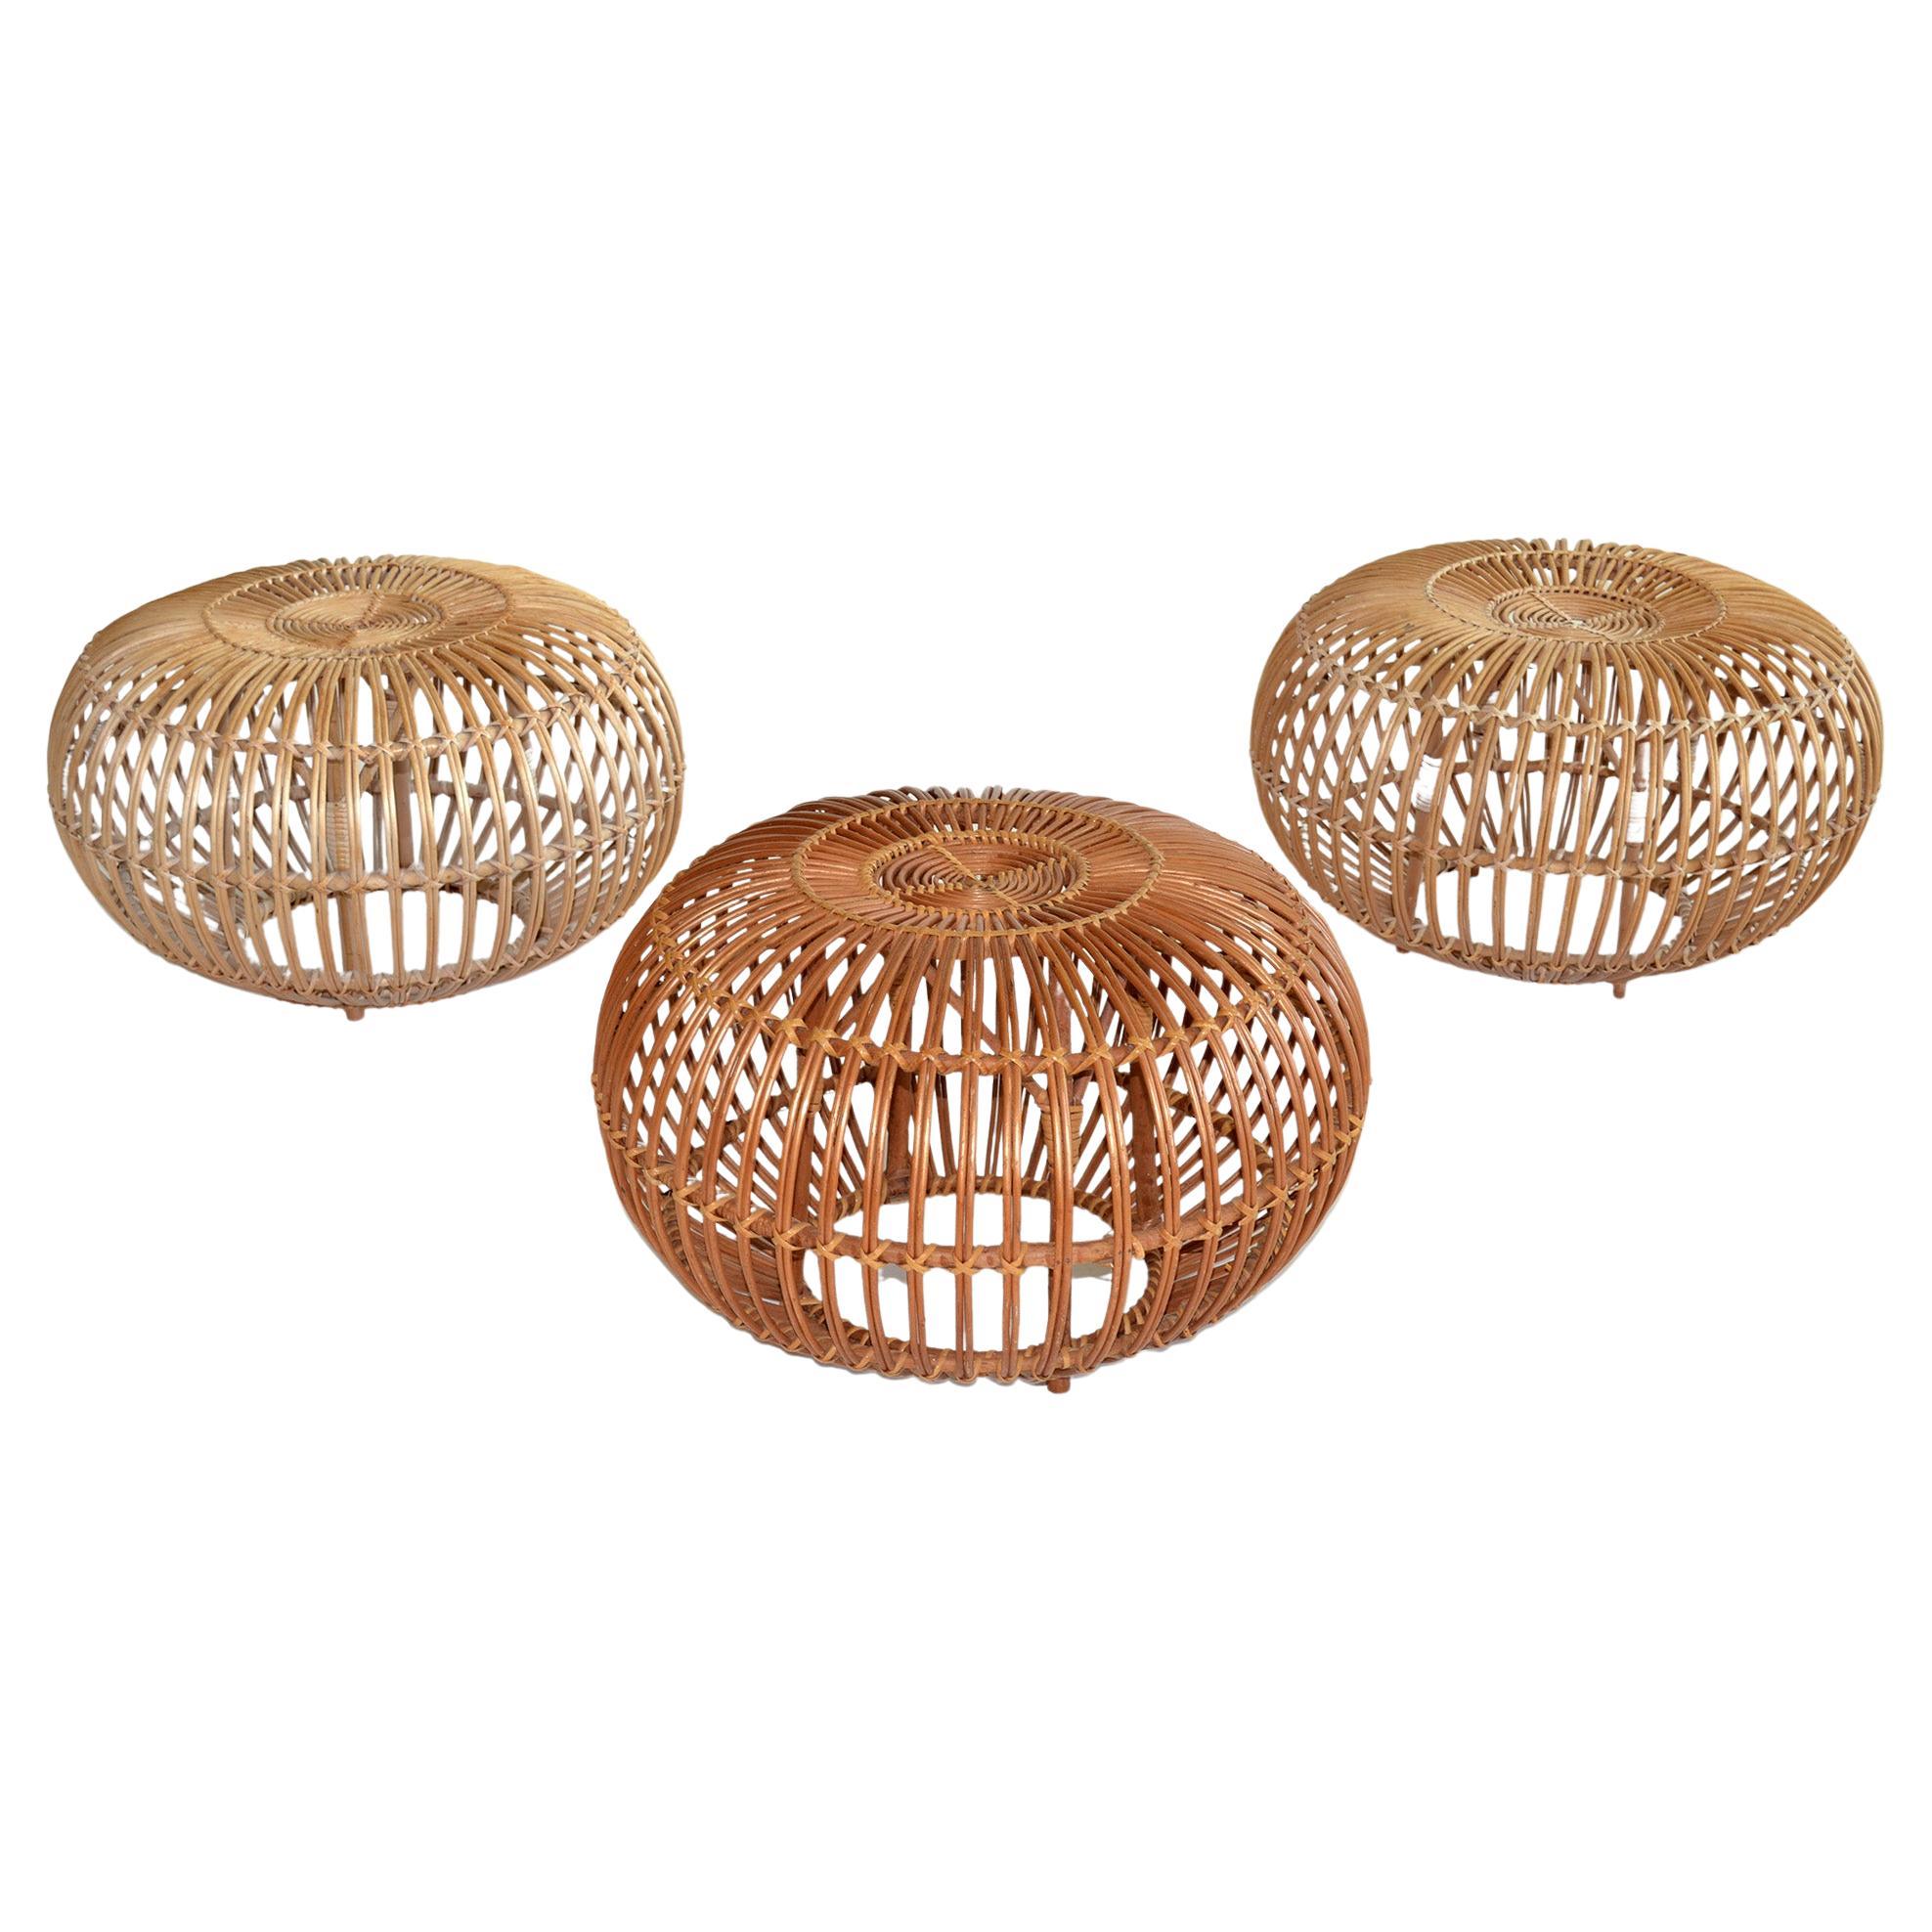 Set of Three Rattan Ottomans or Stools Franco Albini for Boncina Italy 1960s